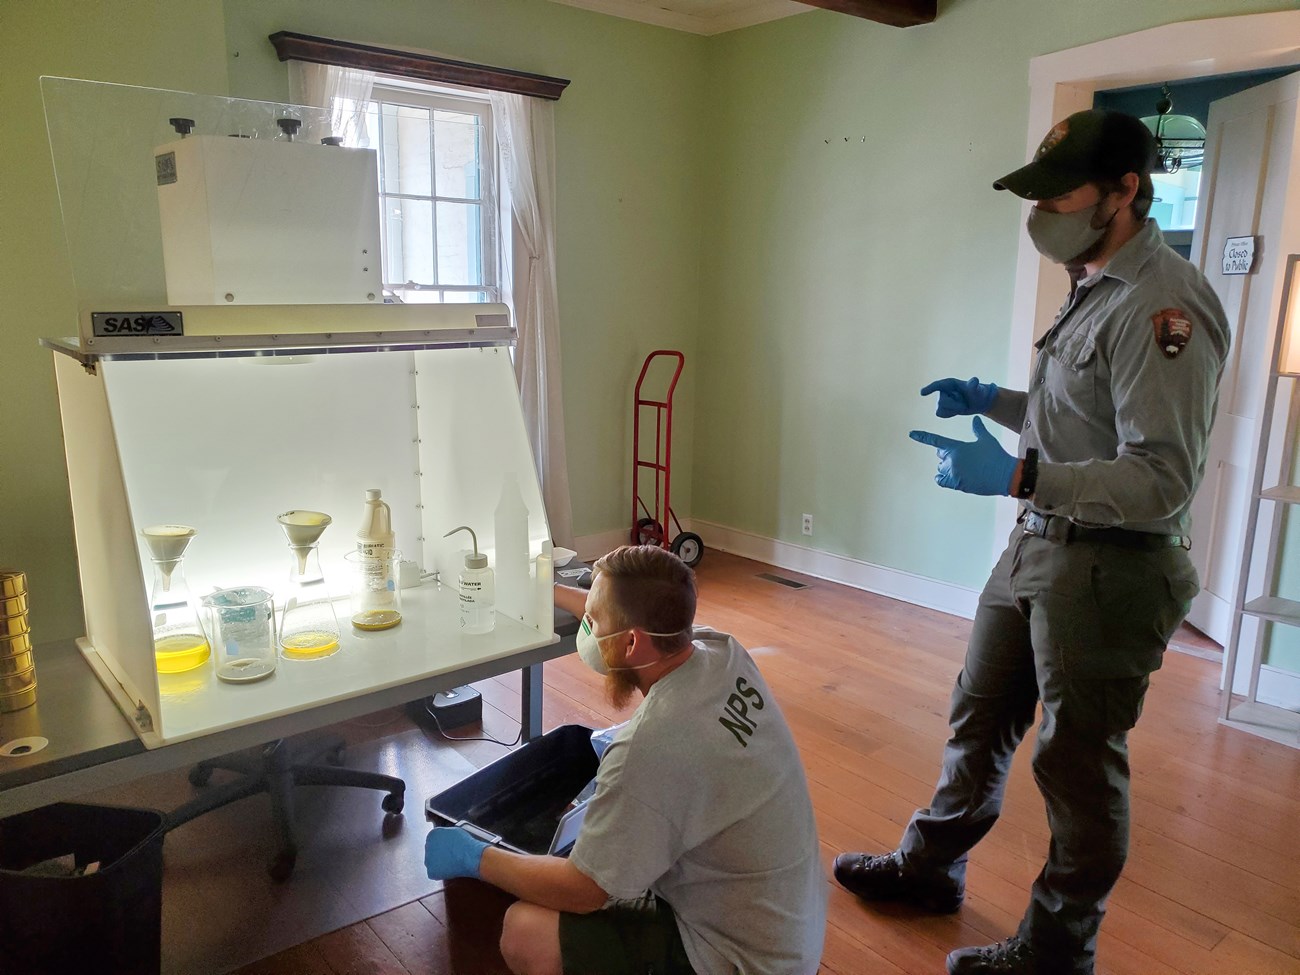 Two men with masks and NPS uniforms look at chemicals in glassware stored inside a fume hood.